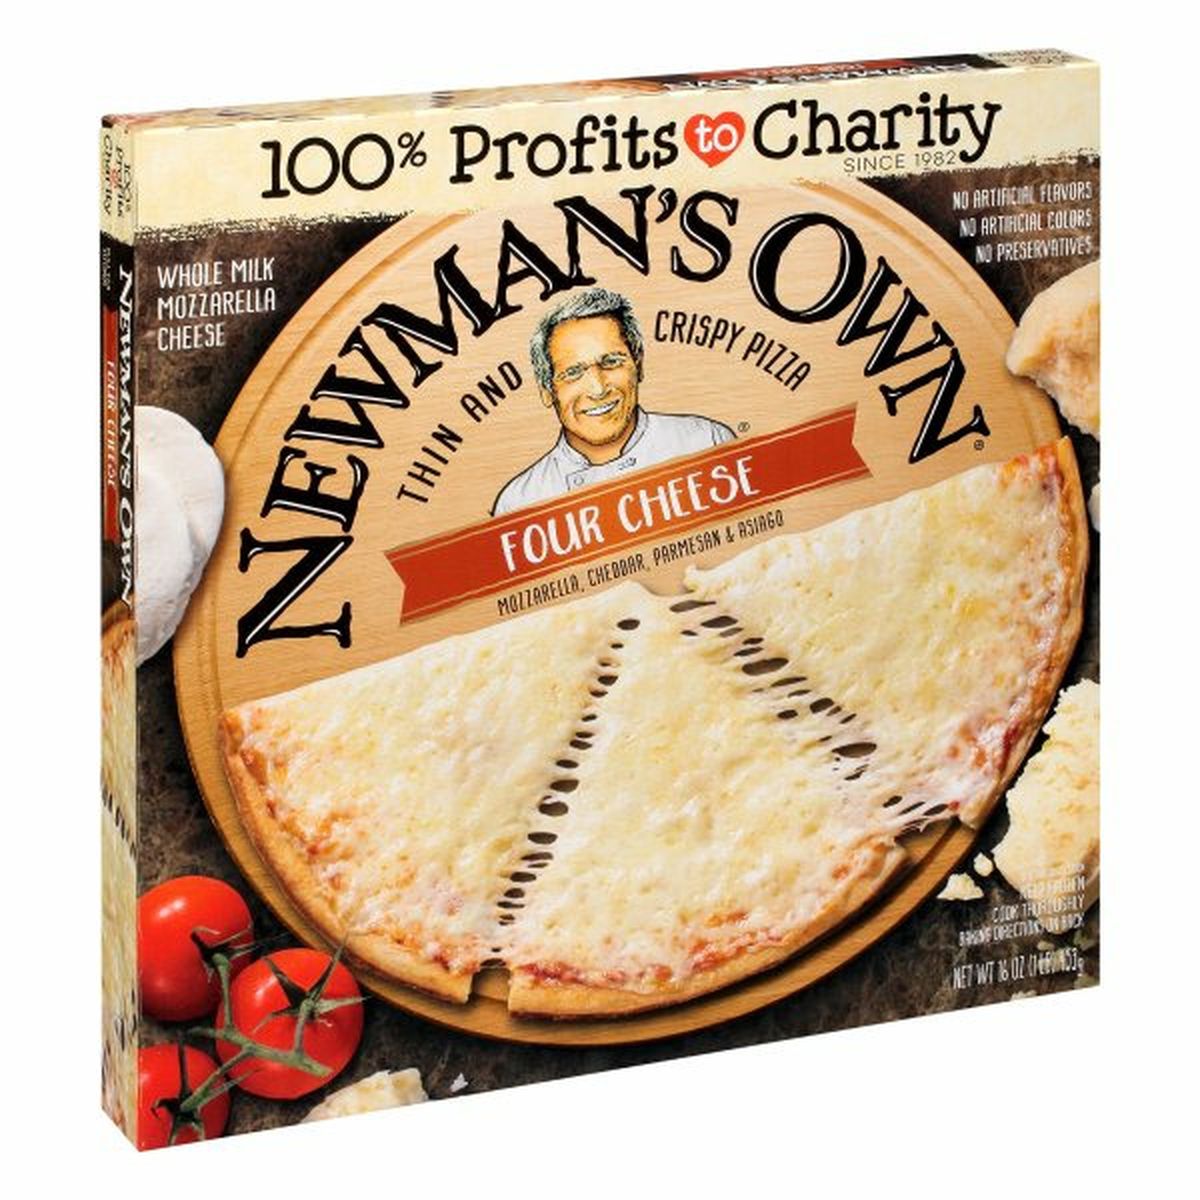 Calories in Newman's Own Pizza, Thin and Crispy, Four Cheese